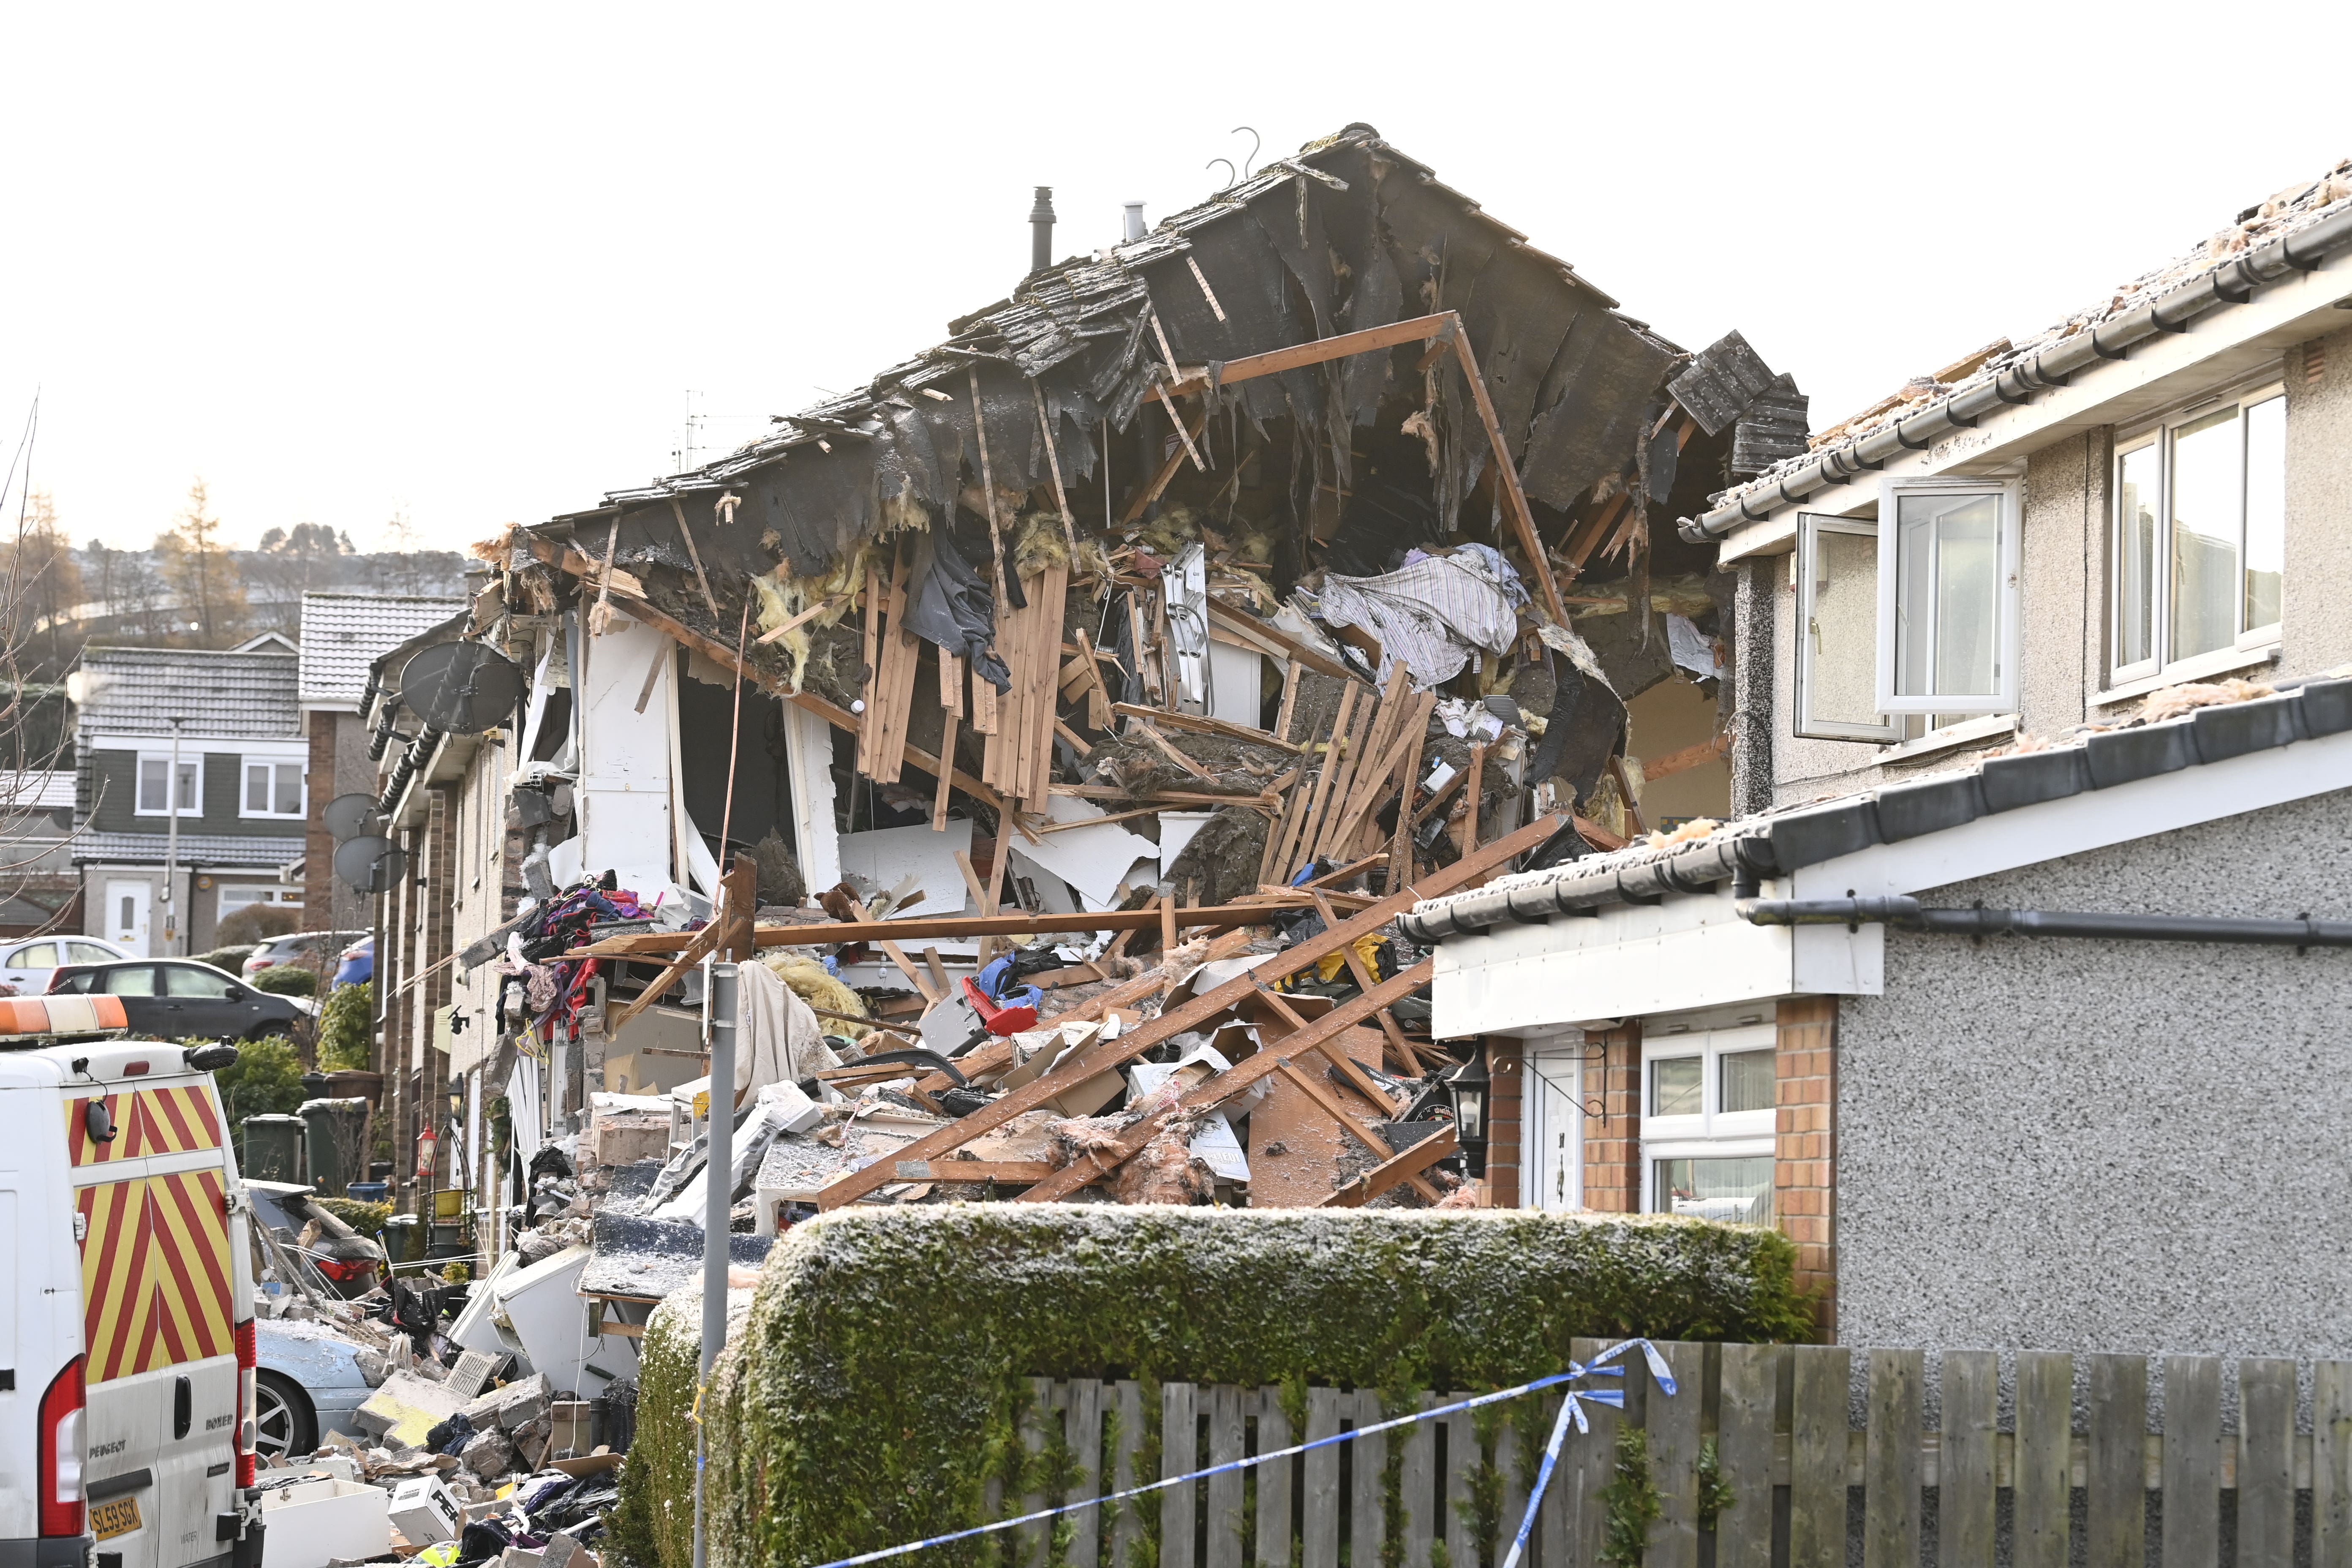 An 84-year-old man has died after an explosion at a house in Baberton, Edinburgh